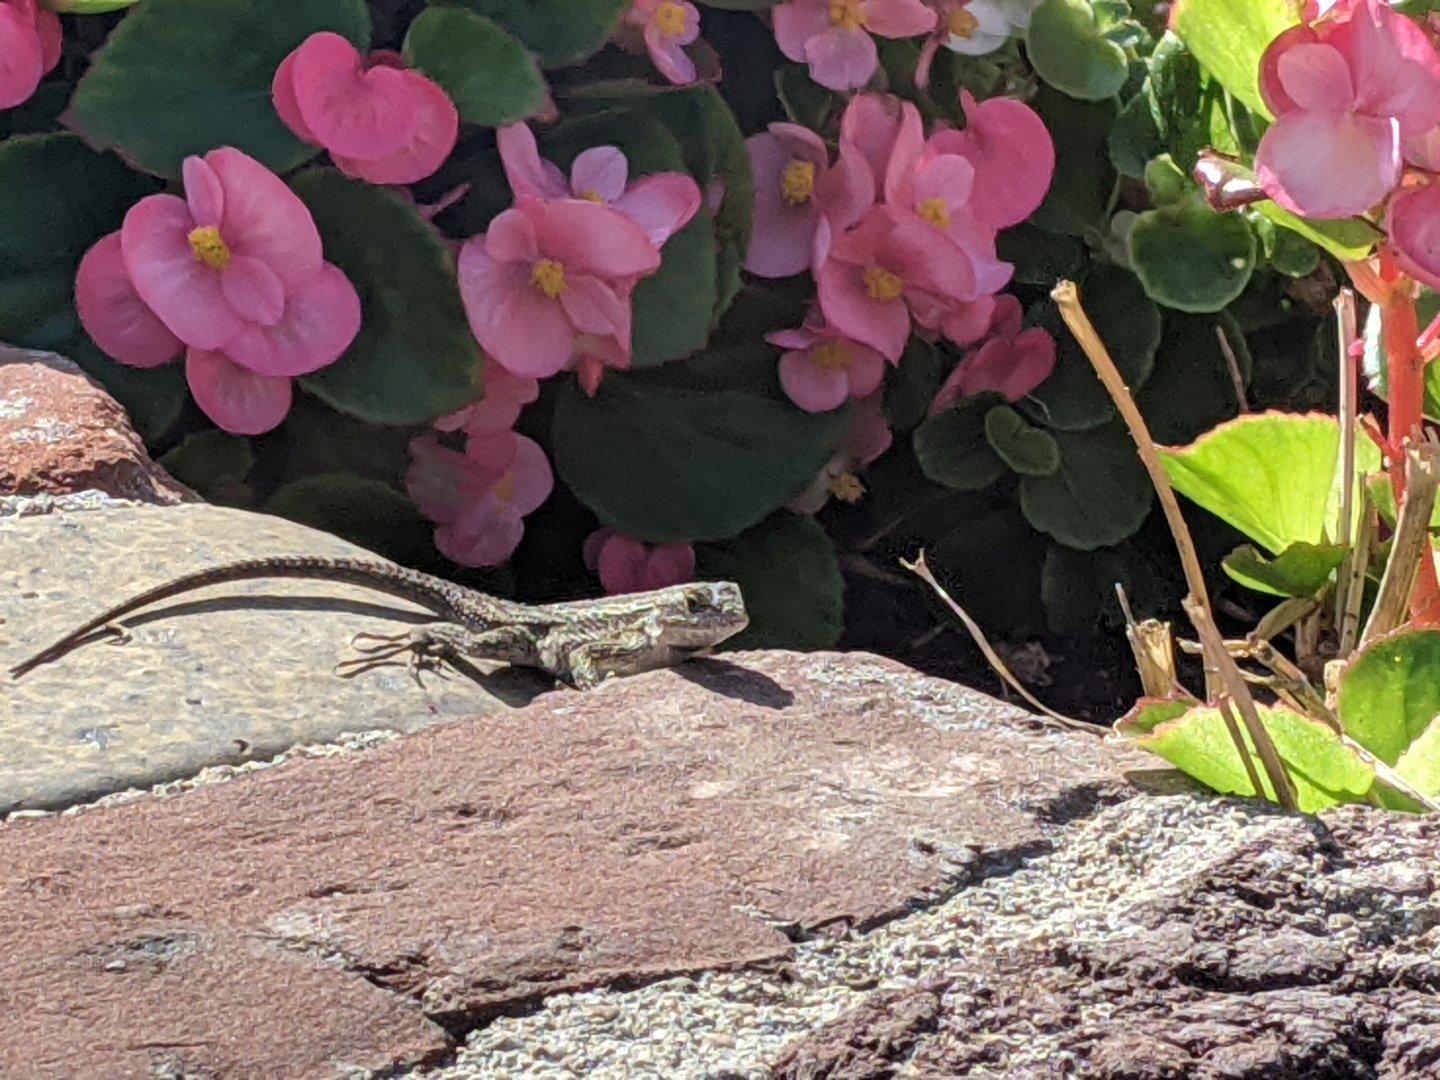 Finally decided to stop postponing my dentist appointments and get it over with. They were running late so I had some time to spend outside and encountered some of their small neighbors. #lizards #flowers